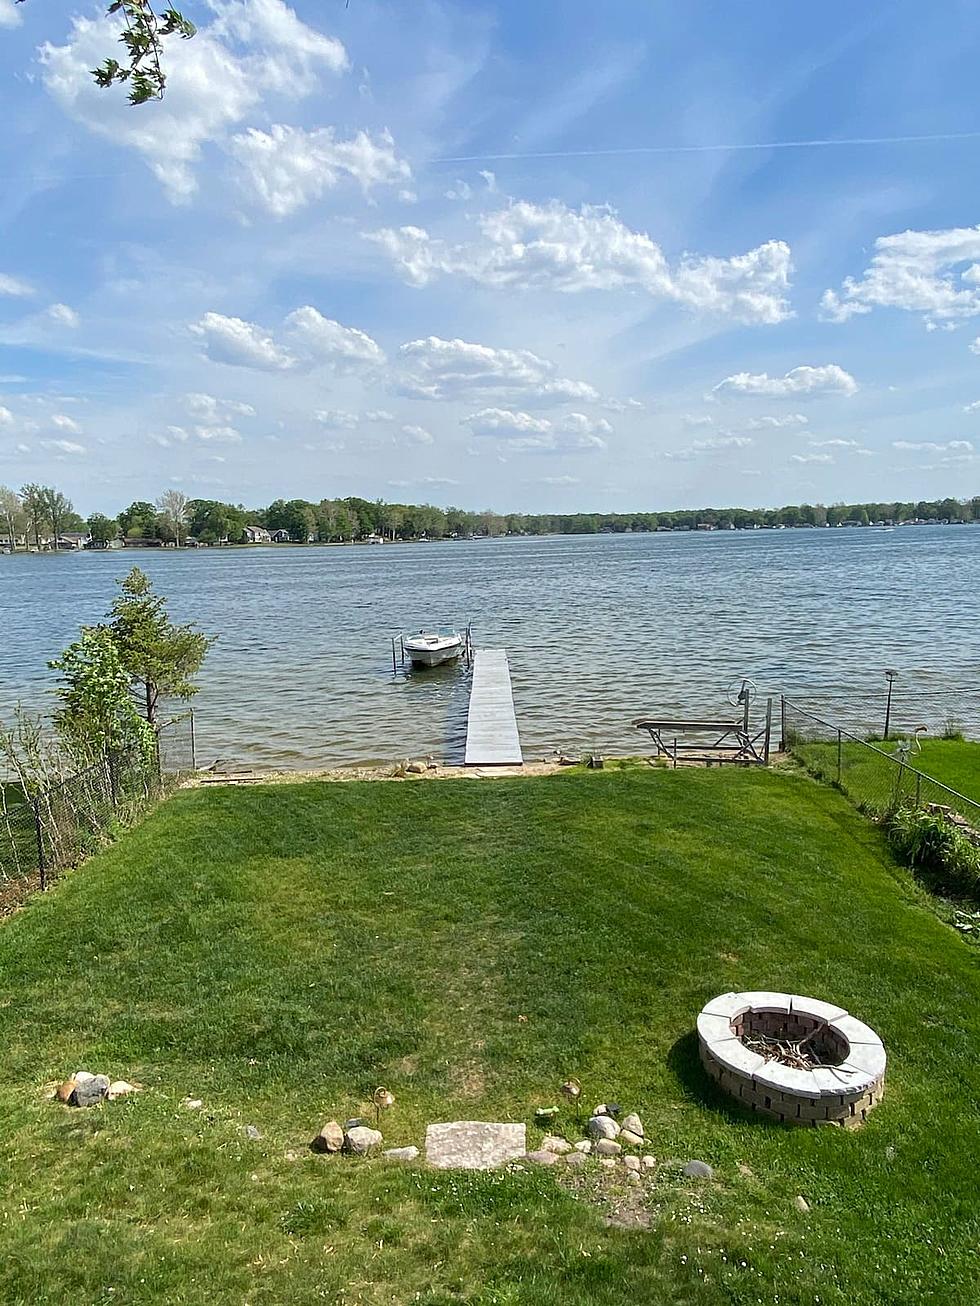 Killer View With a Big Price: &#8211; Portage, Michigan Airbnb is $1300 a Night